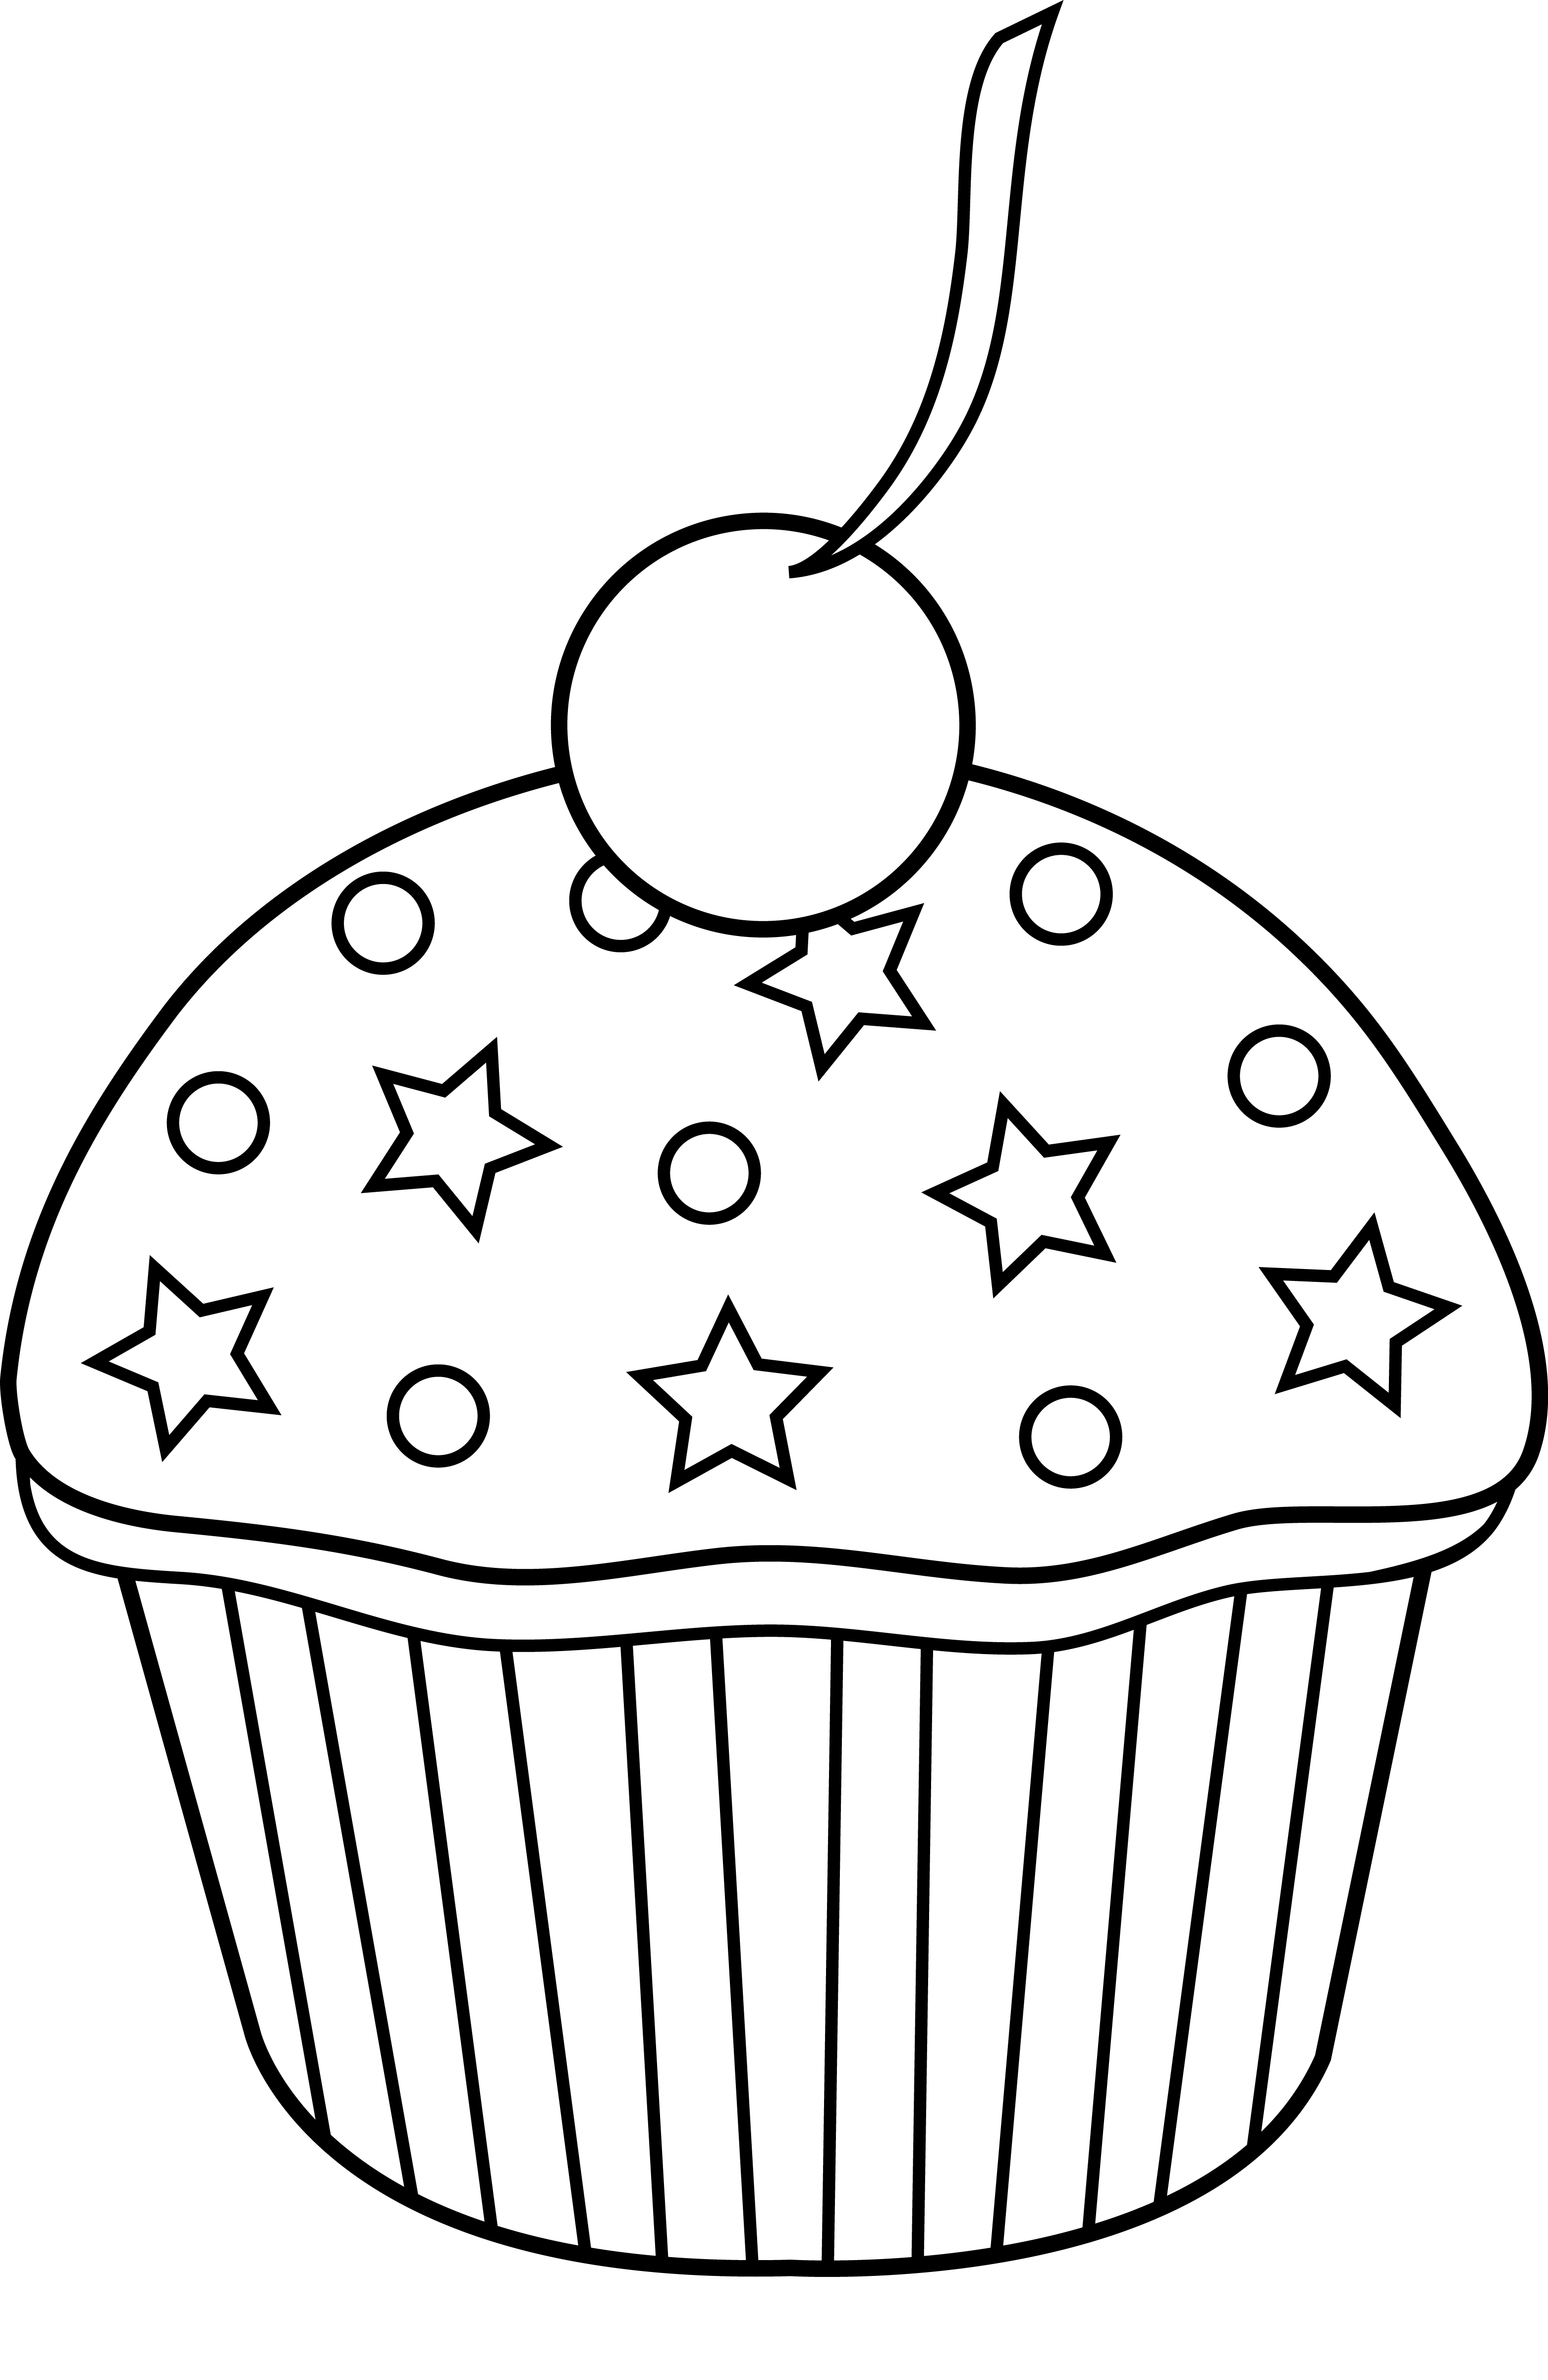 coloring clipart cupcake